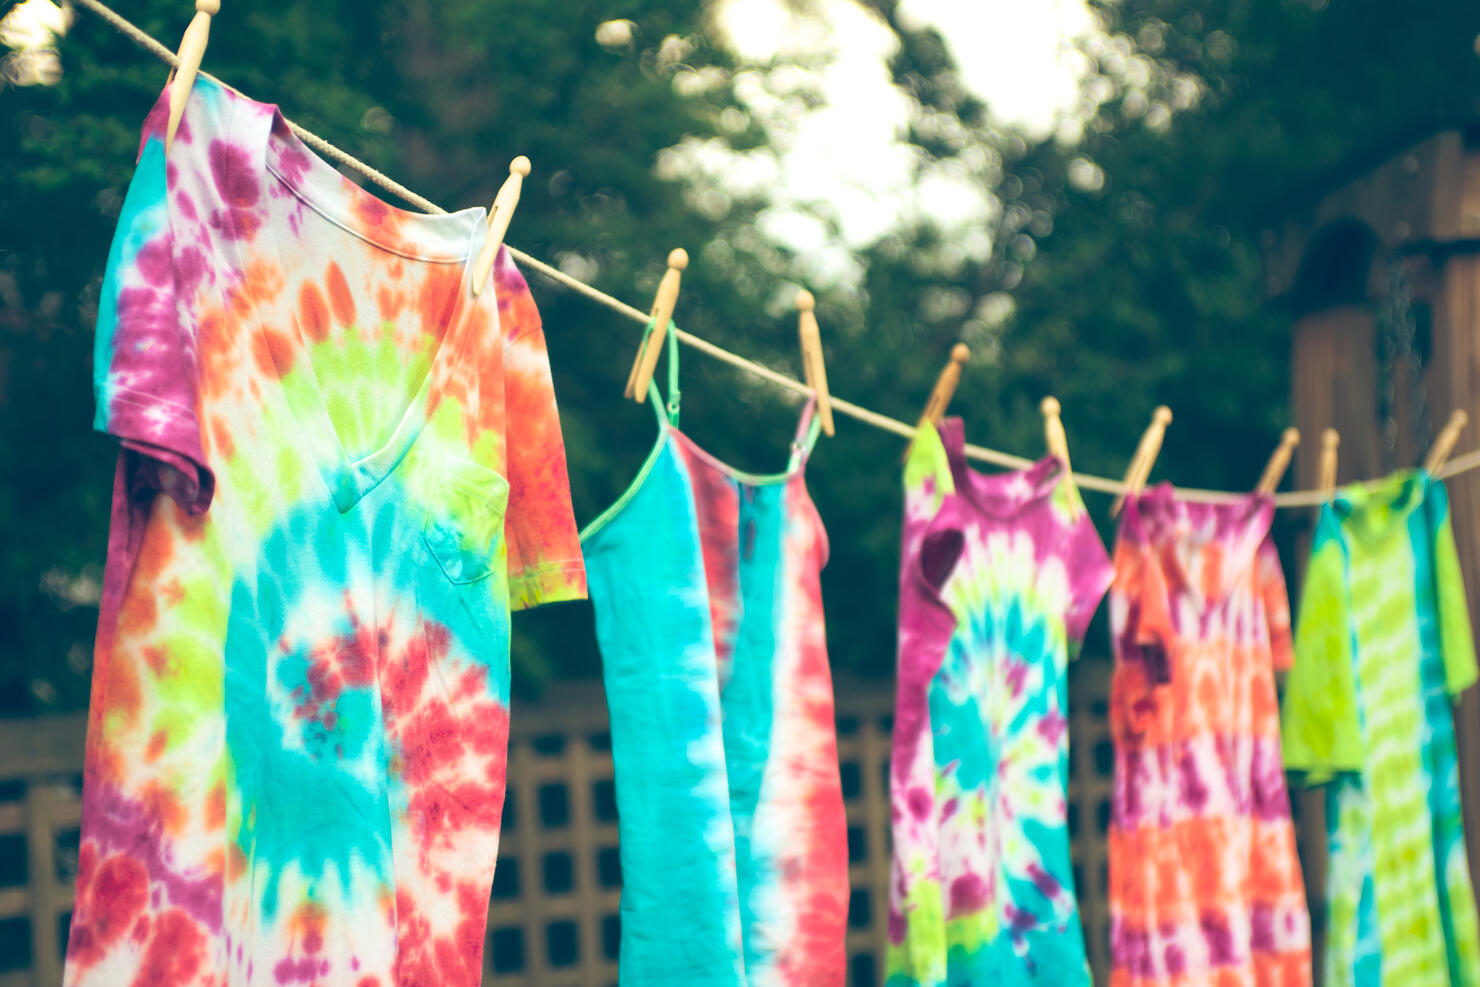 Tie dyed tee shirts hanging from a clothes line.